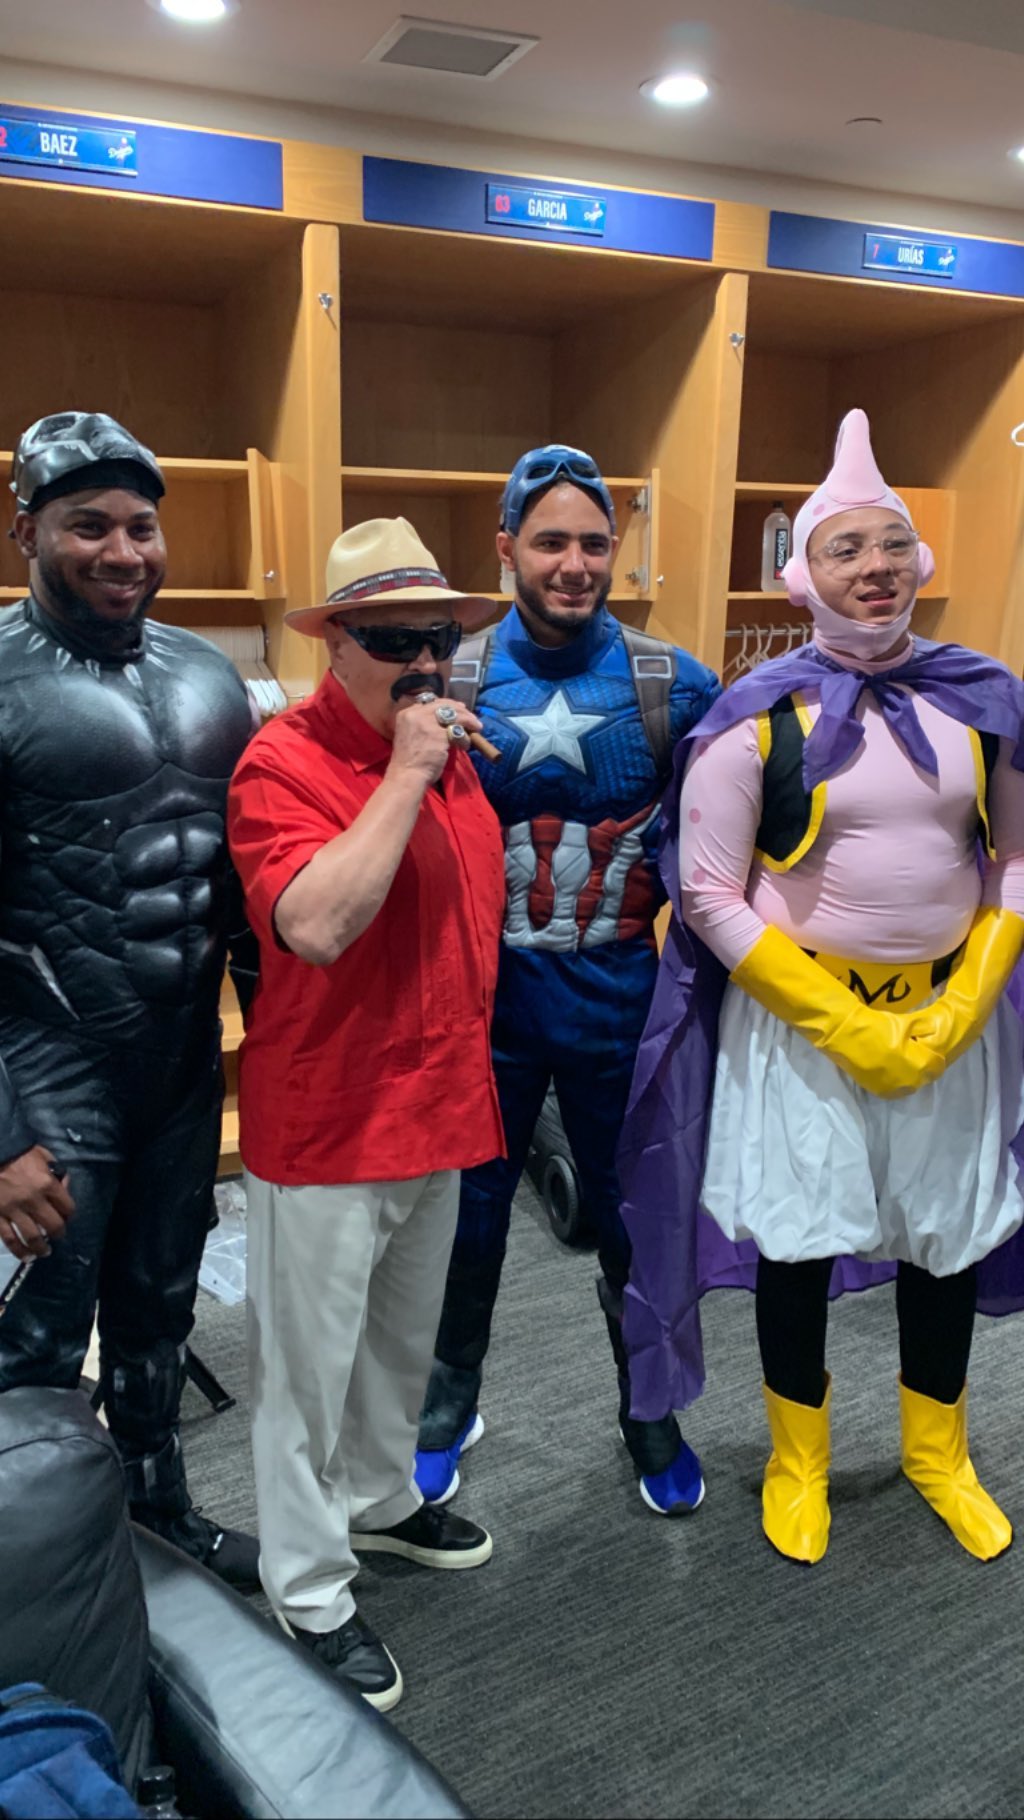 Dodgers had their dressup day for 2019 involving all on their charter